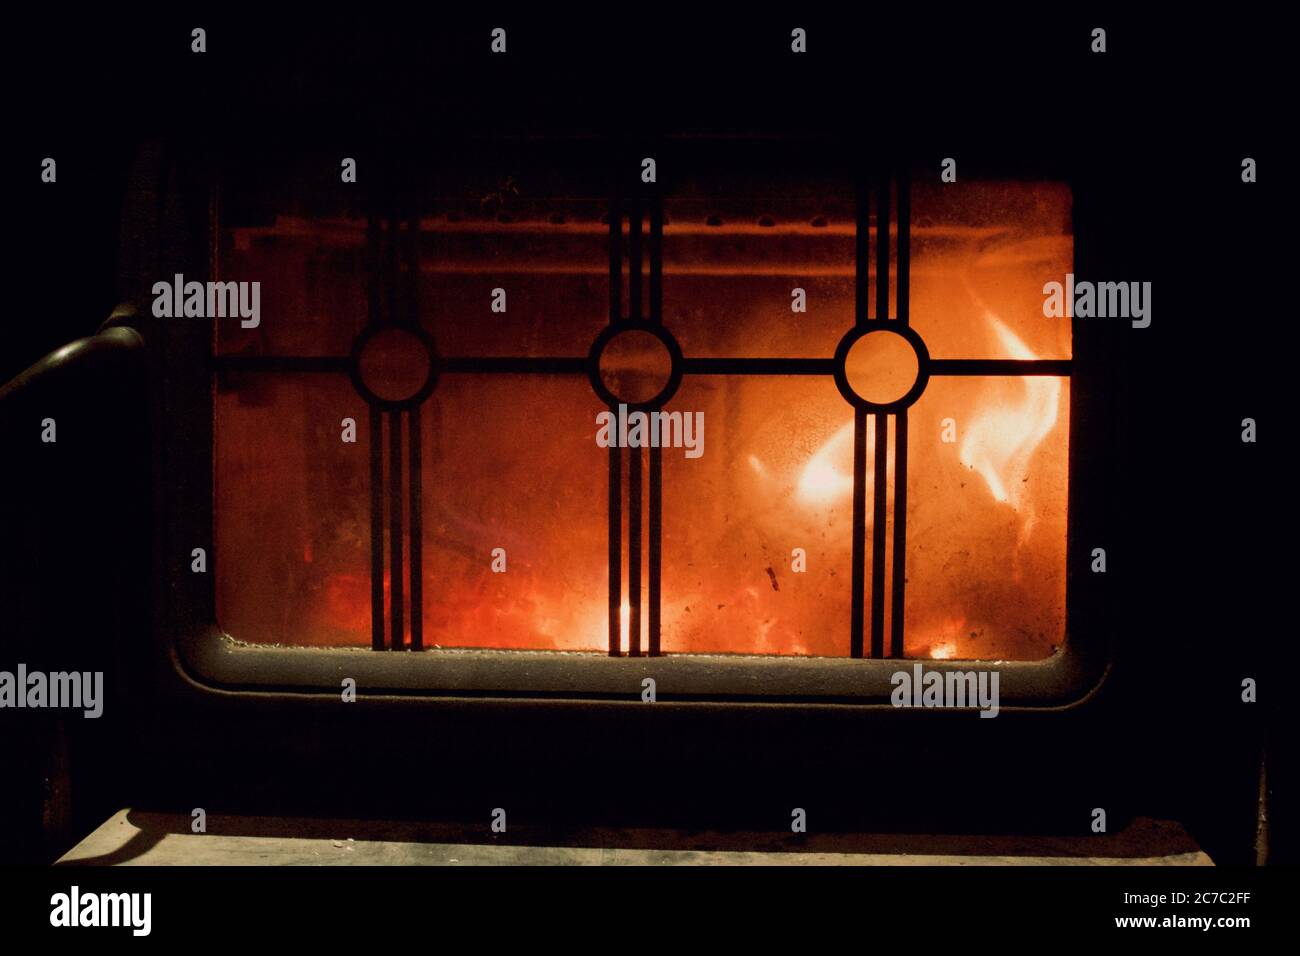 Closeup shot of fire burning in a fireplace with a metallic fence Stock Photo